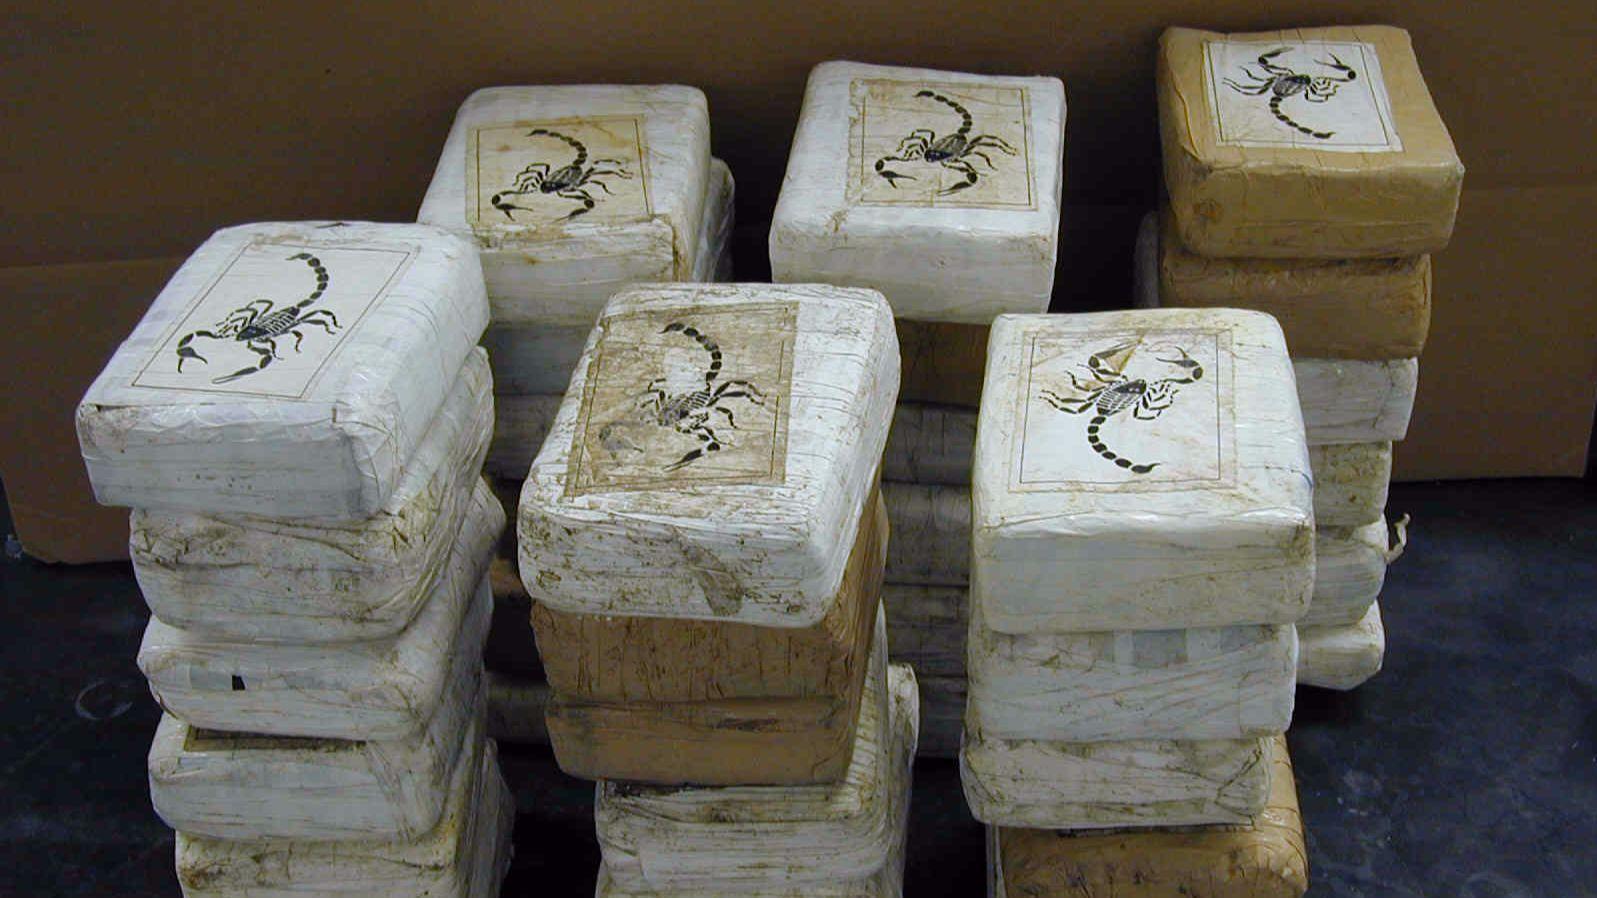 Puerto Rico Man Gets 10 Year Prison Term For Bringing 500 Pounds of Cocaine Here